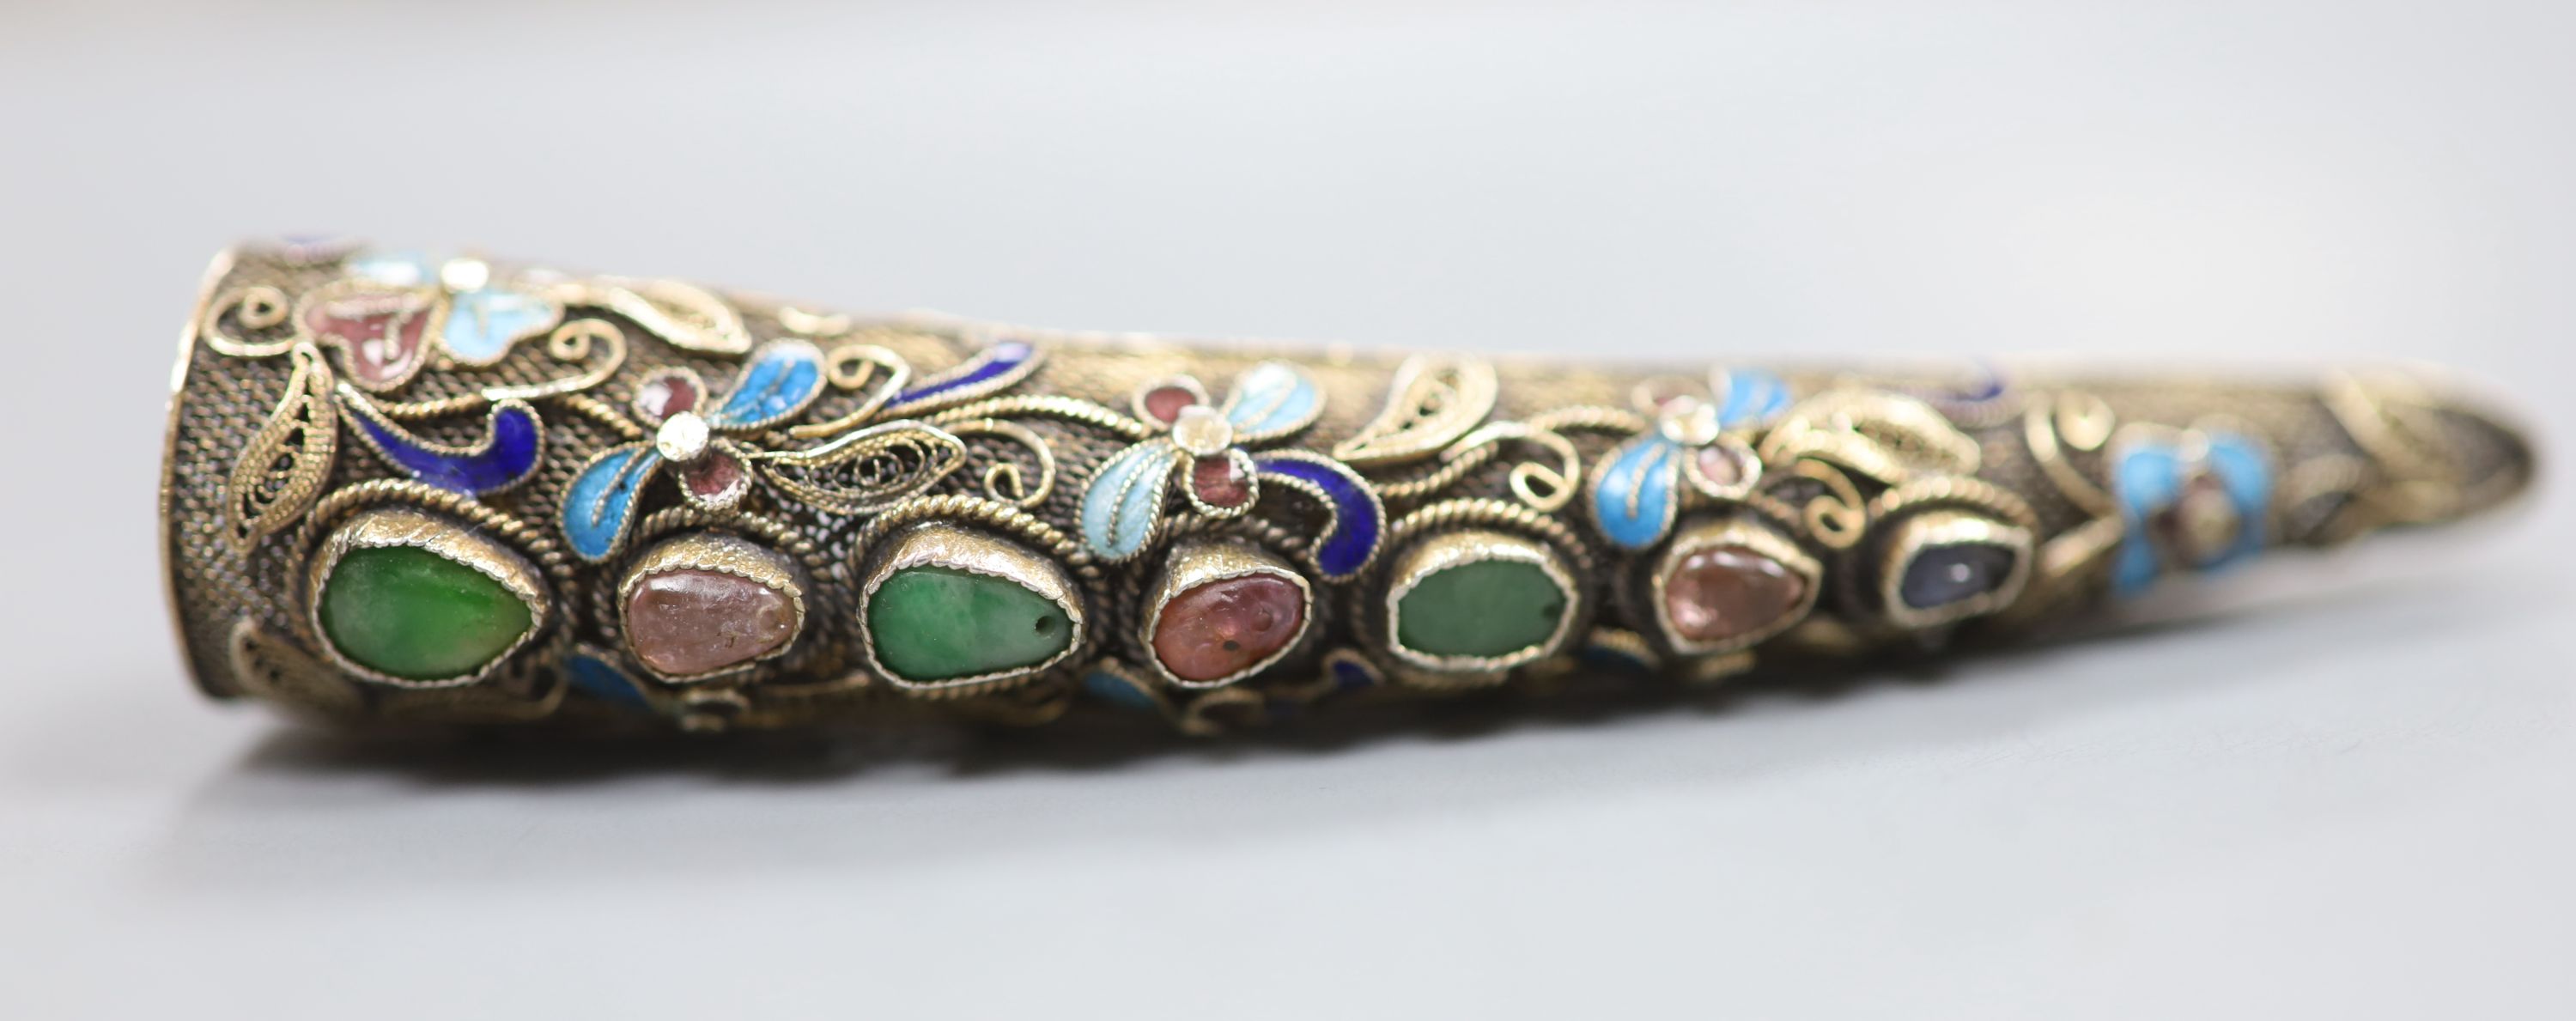 A late 19th/early 20th century Chinese filigree white metal, enamel and gem set nail guard brooch, 85mm.